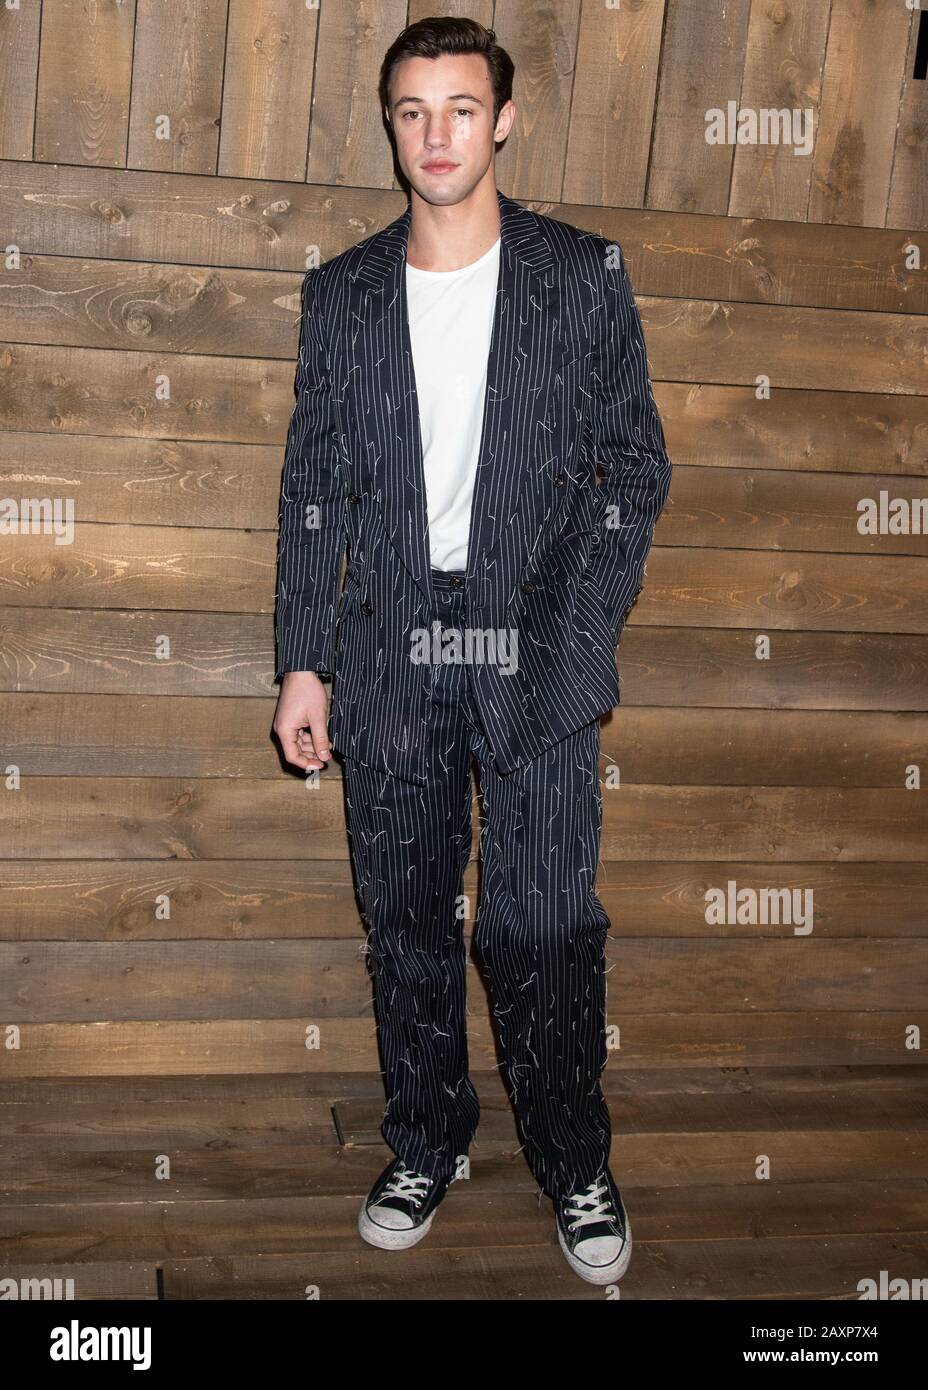 New York City, United States. 12th Feb, 2020. MANHATTAN, NEW YORK CITY, NEW  YORK, USA - FEBRUARY 12: Cameron Dallas arrives at the Michael Kors  Collection Fall/Winter 2020 Runway Show - February